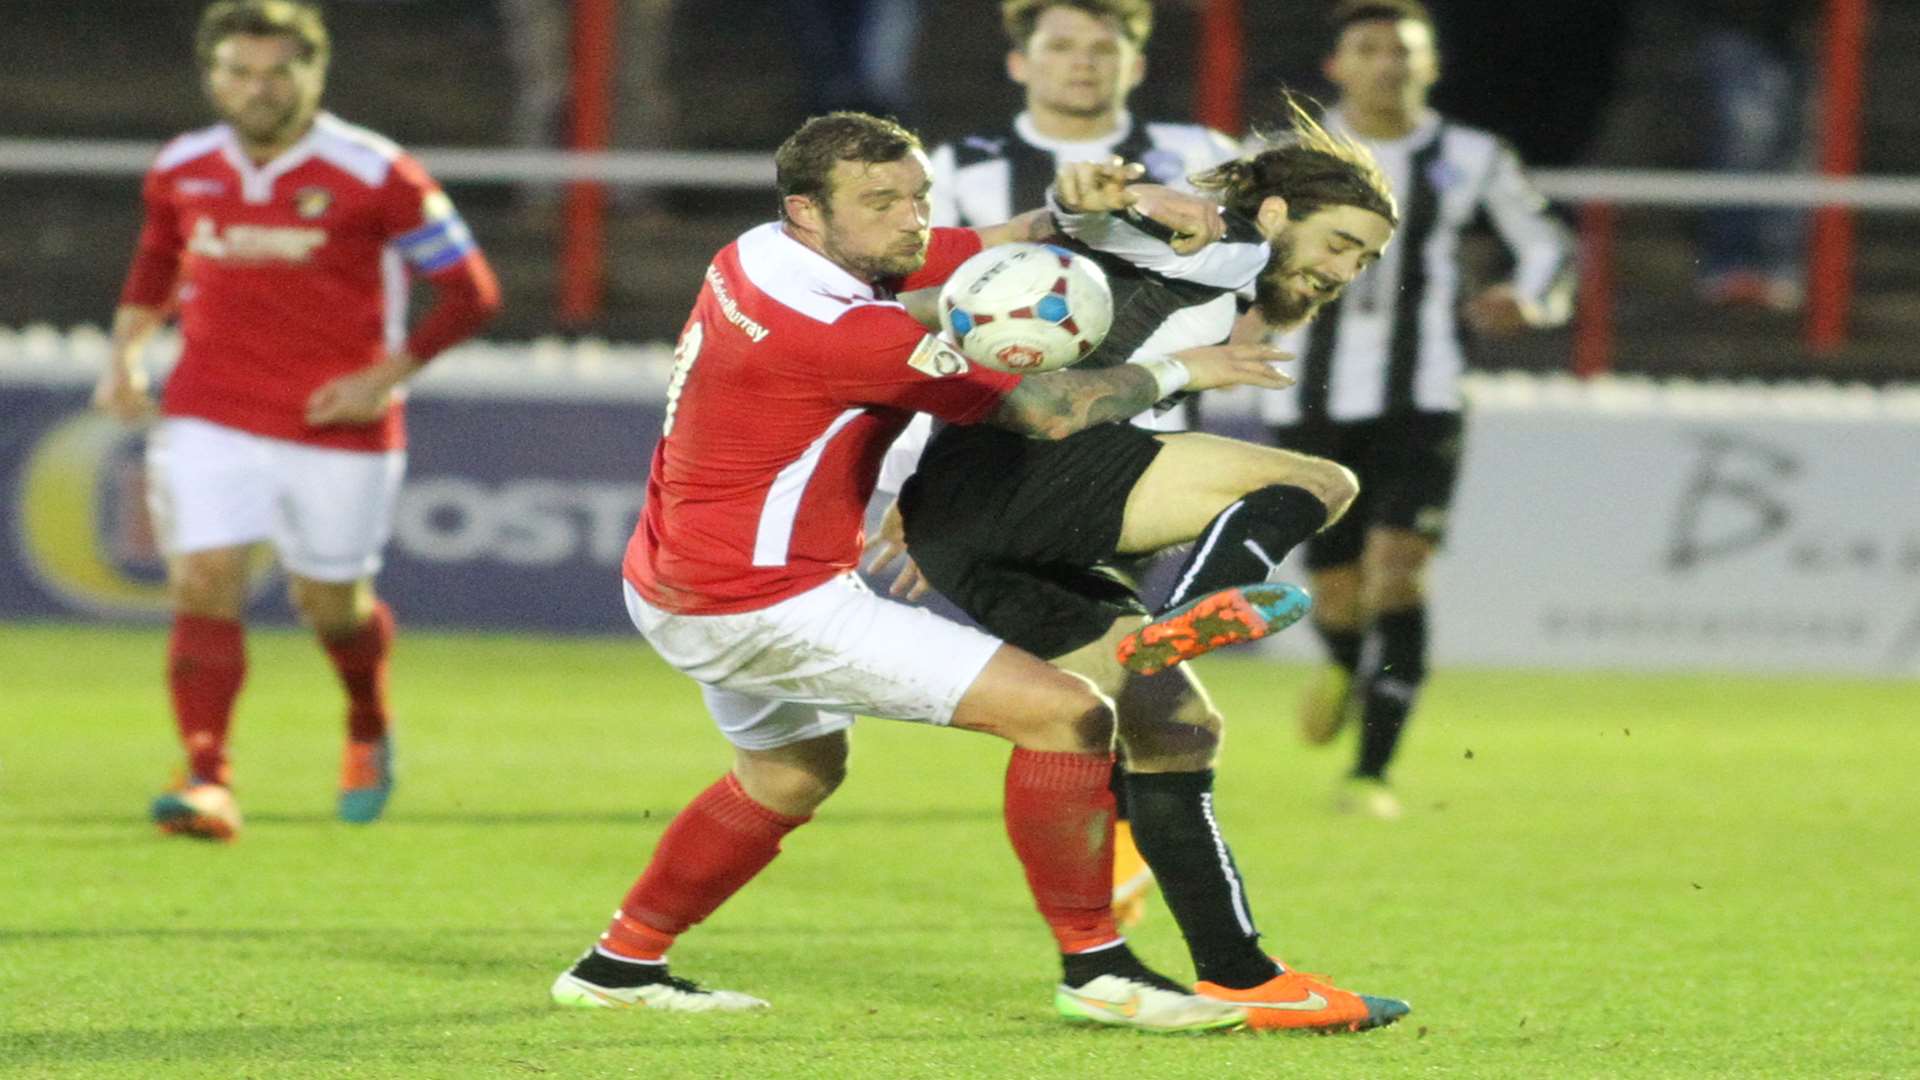 Danny Kedwell is one of the new faces at Ebbsfleet United Picture: John Westhrop